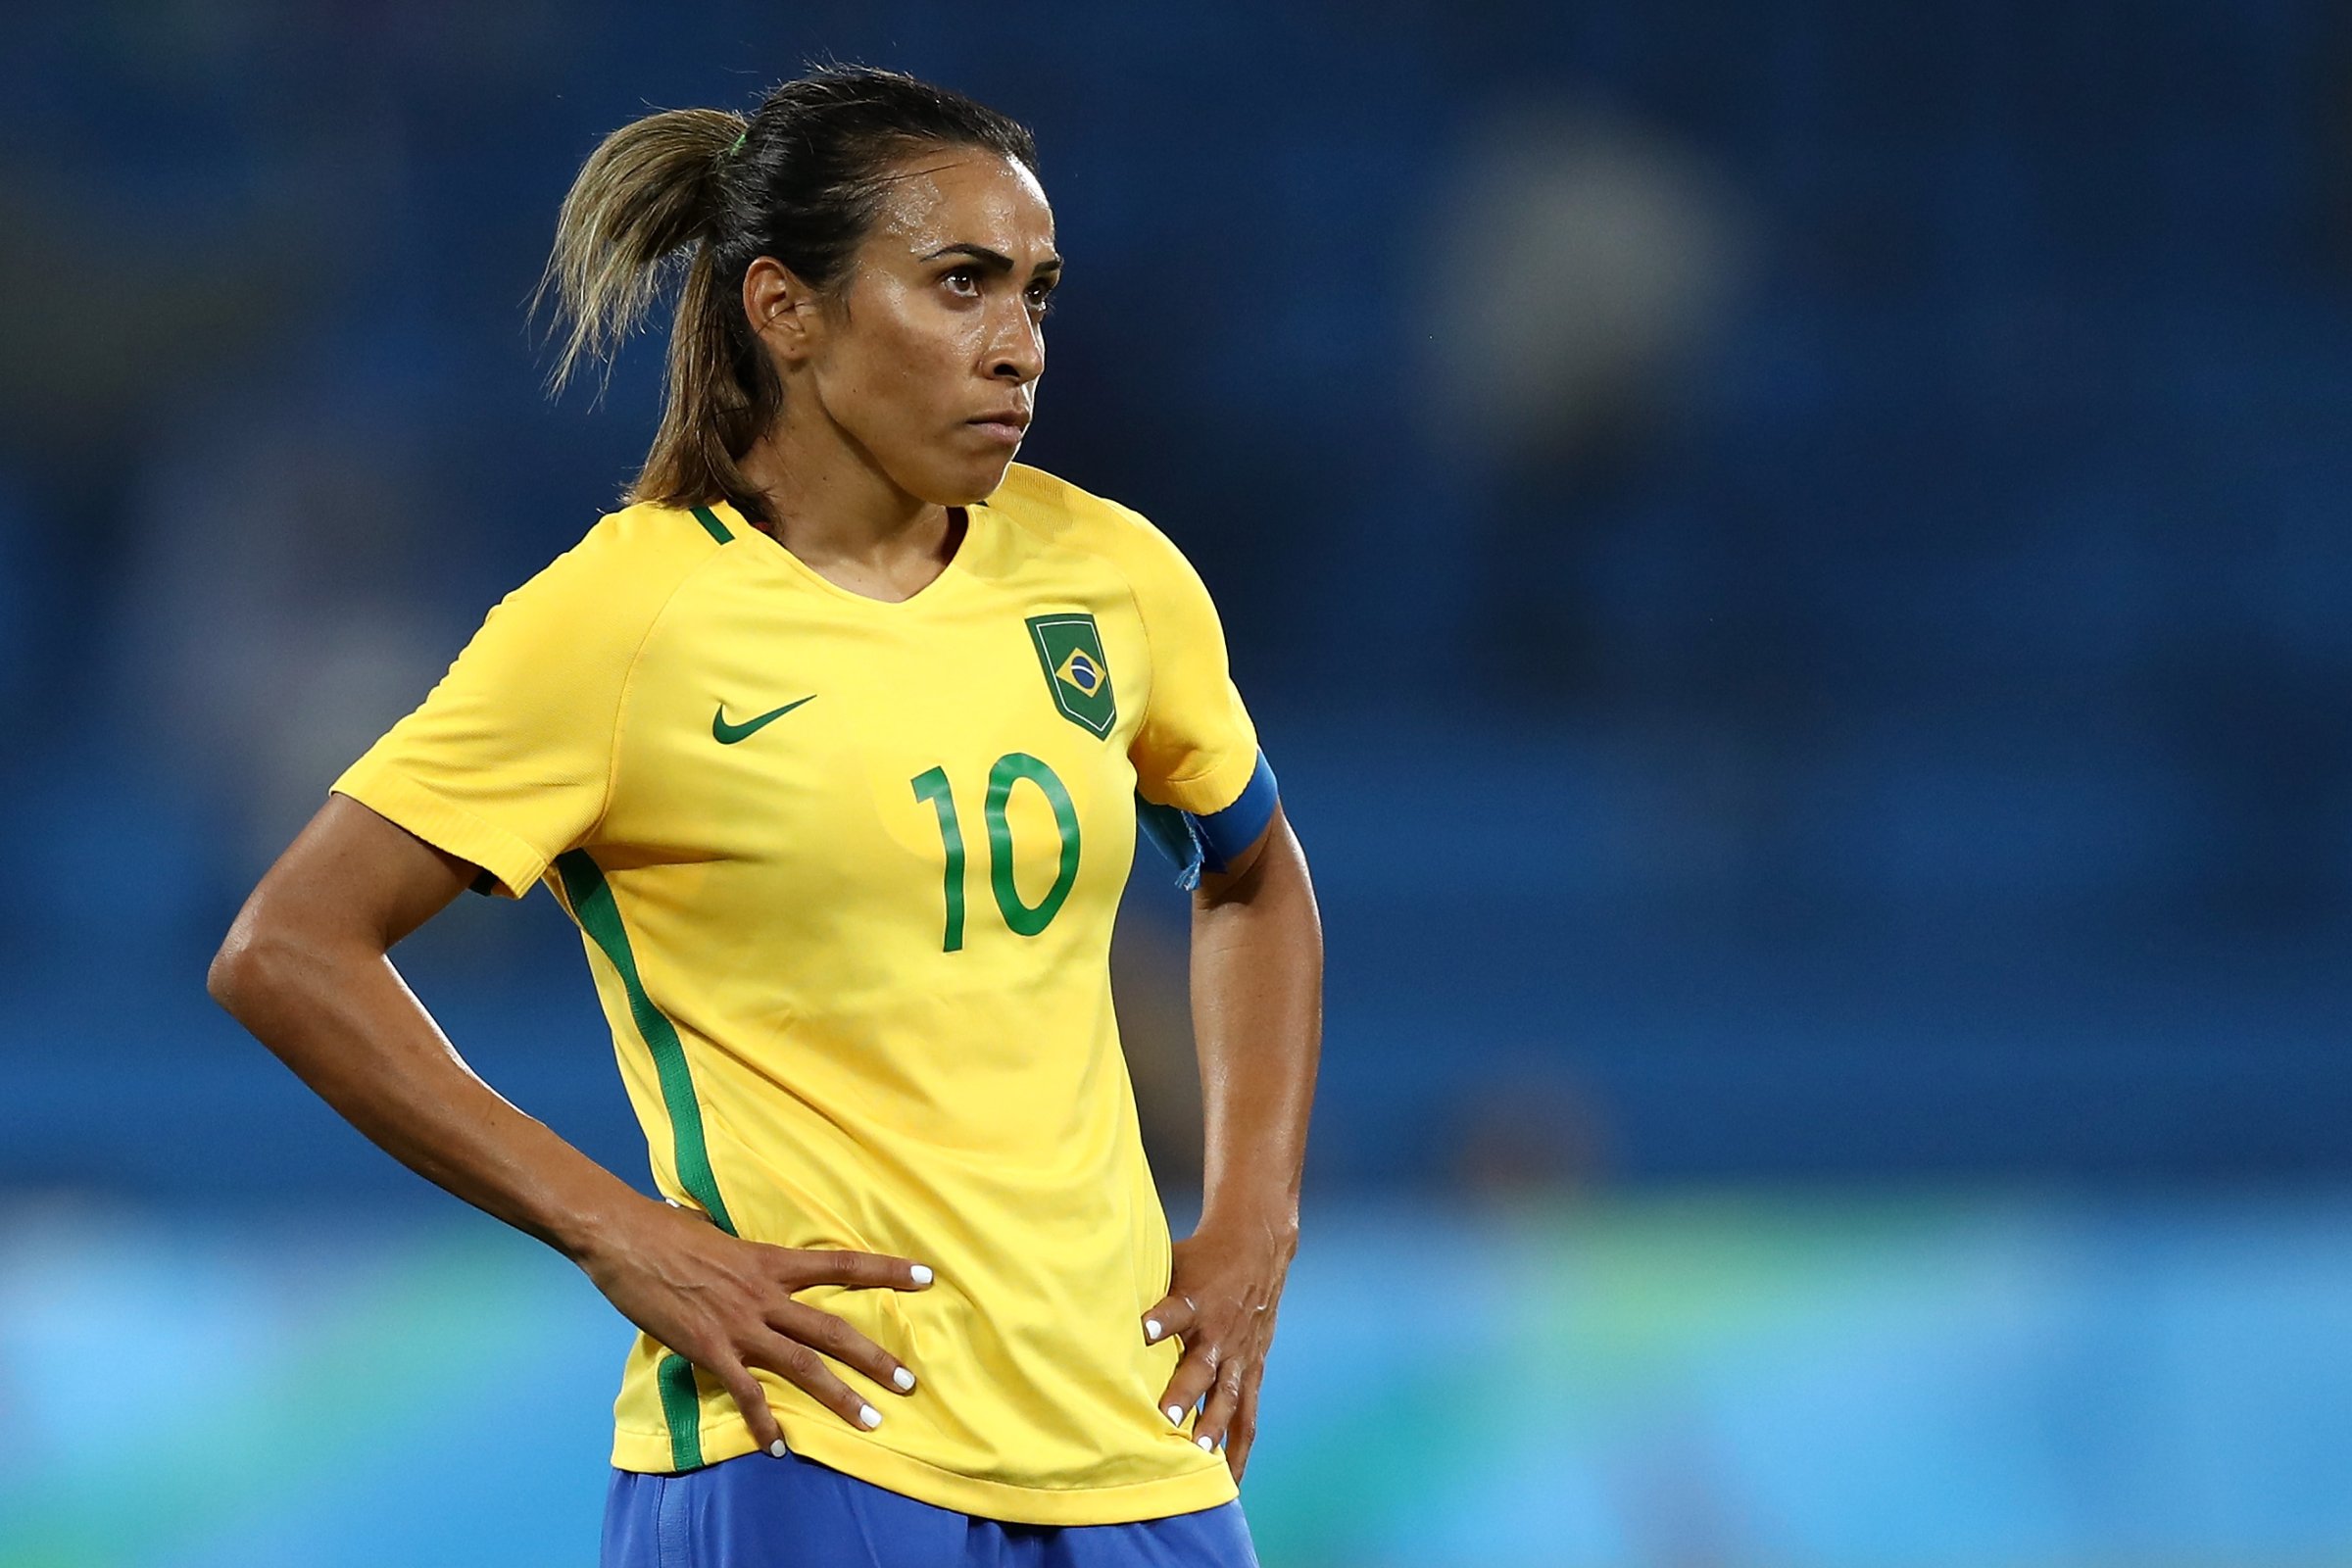 Marta of Brazil looks on during the Women's Group E first round match between Brazil and Sweden on Day 1 of the Rio 2016 Olympic Games at the Olympic Stadium on August 6, 2016 in Rio de Janeiro, Brazil.